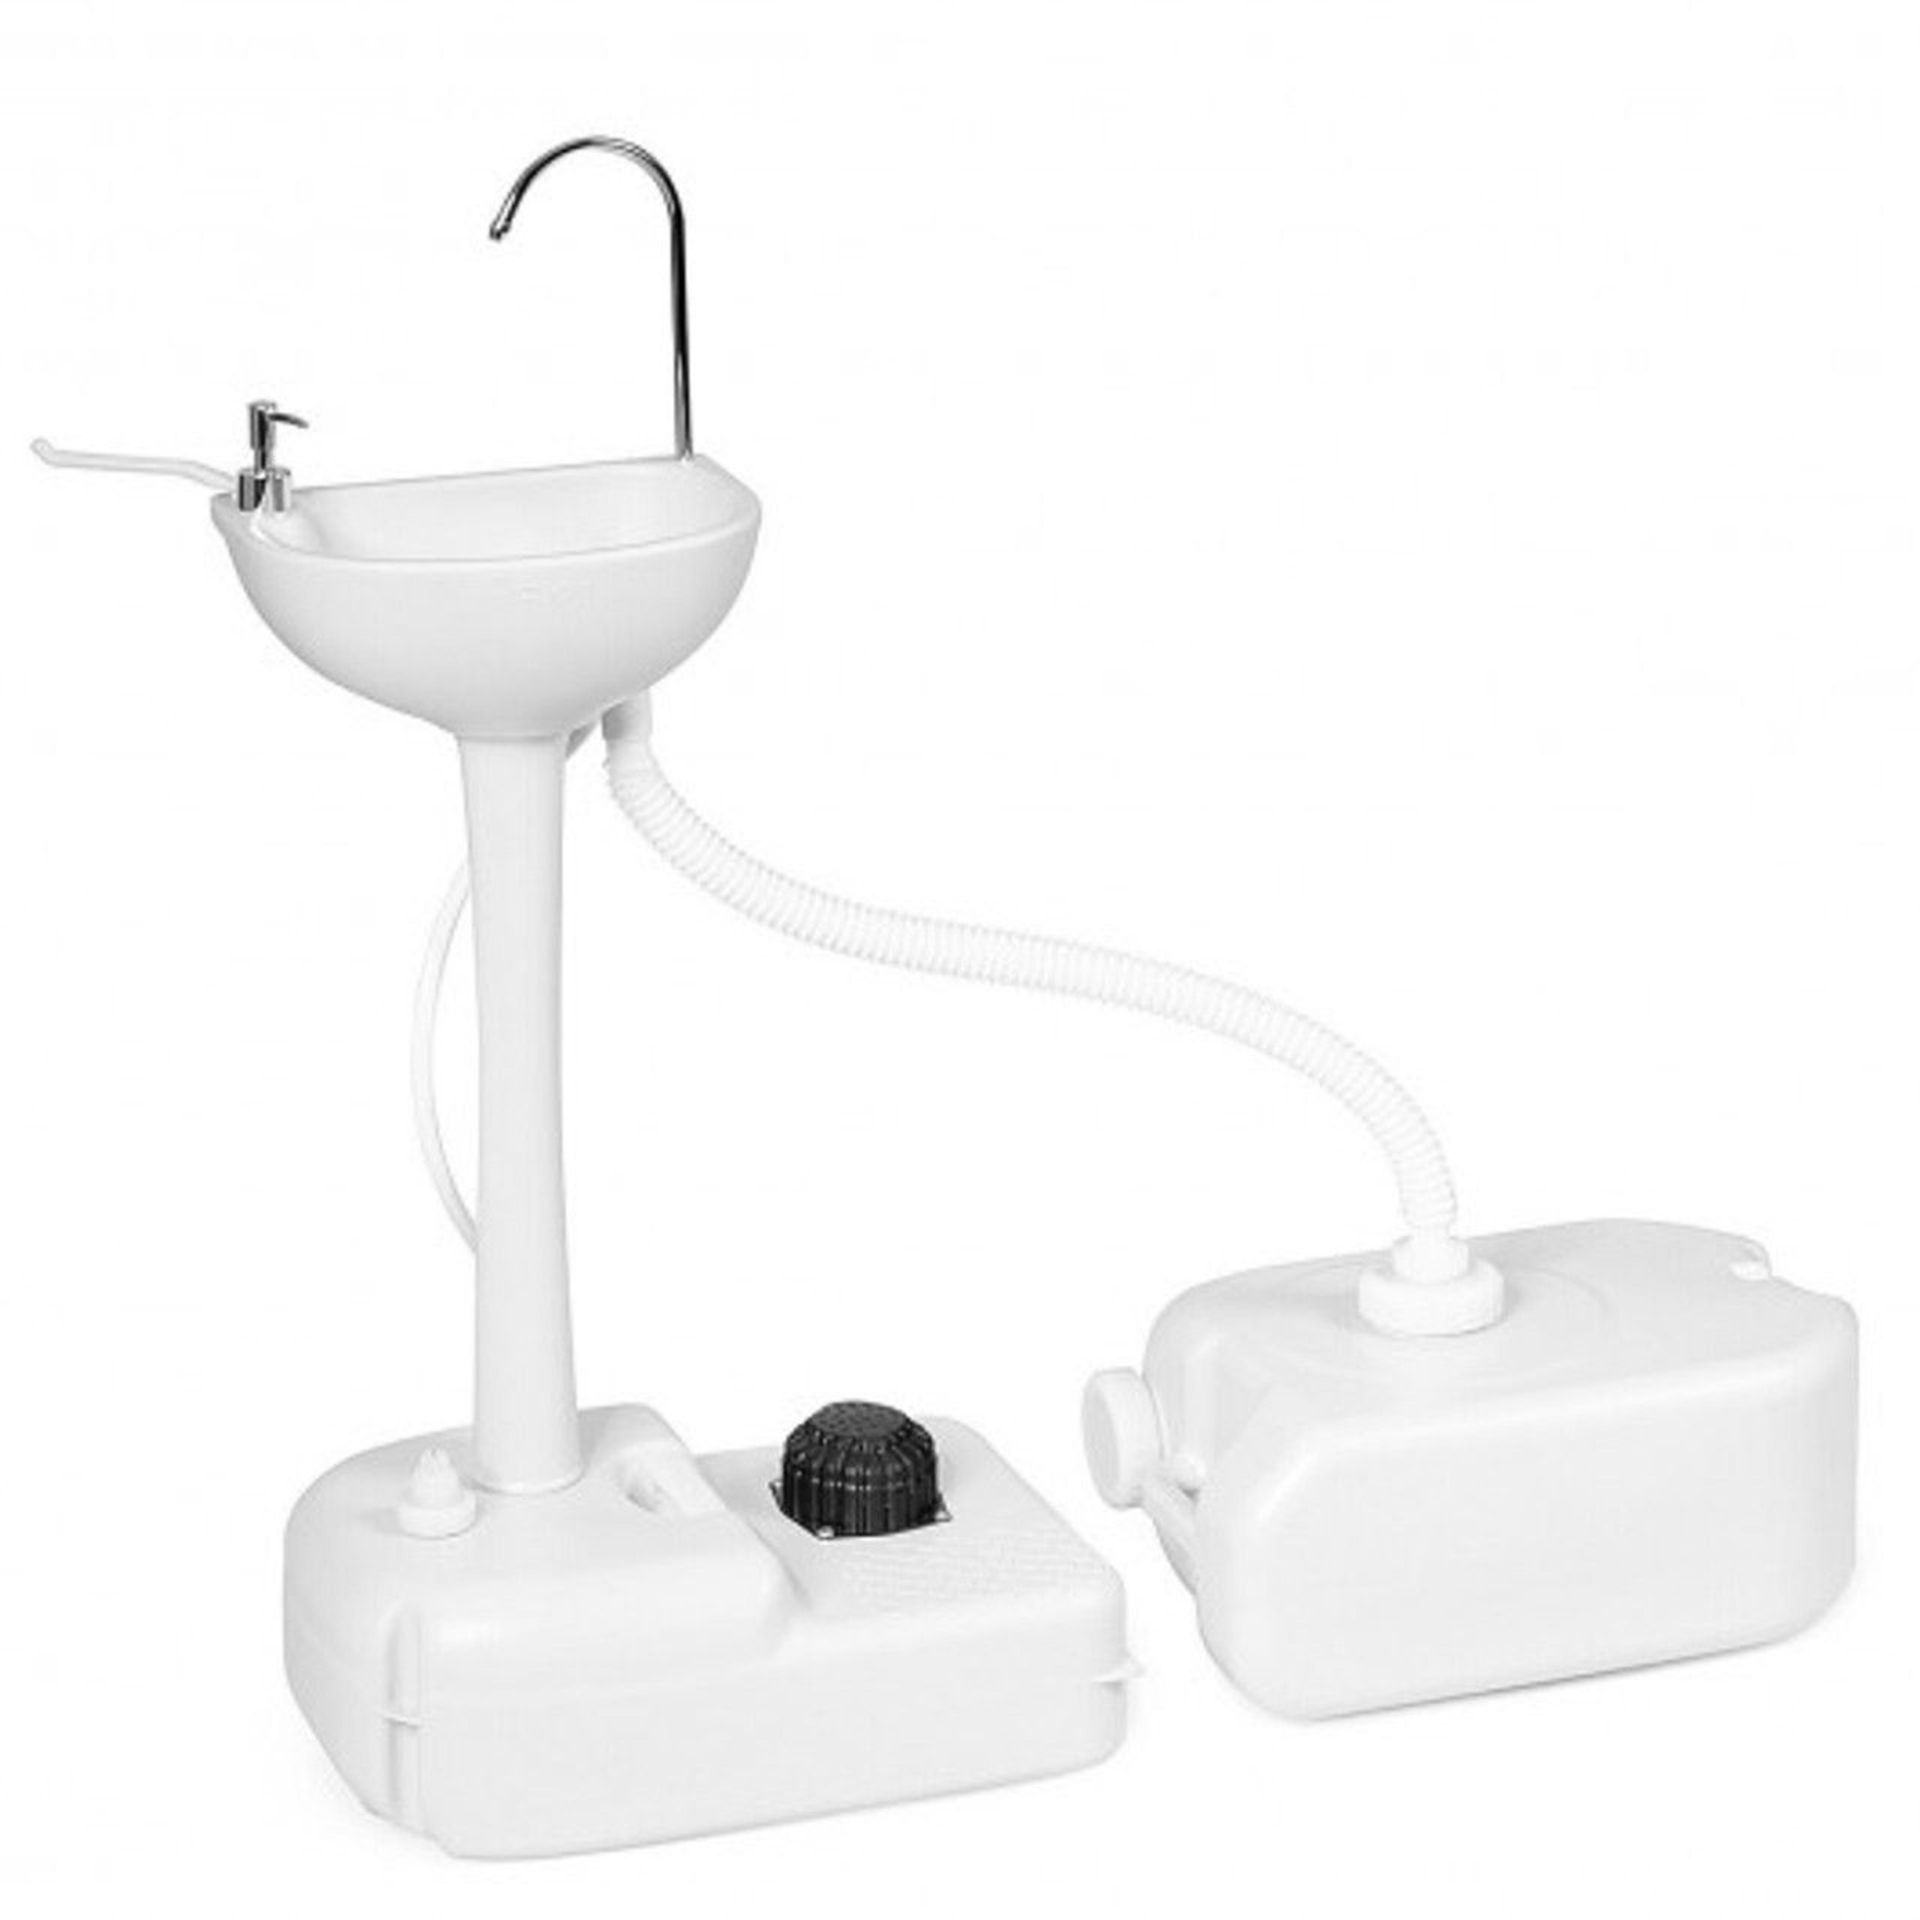 Camping Hand Wash Station Basin Stand With 4.5 Gallon Tank. - ER26.